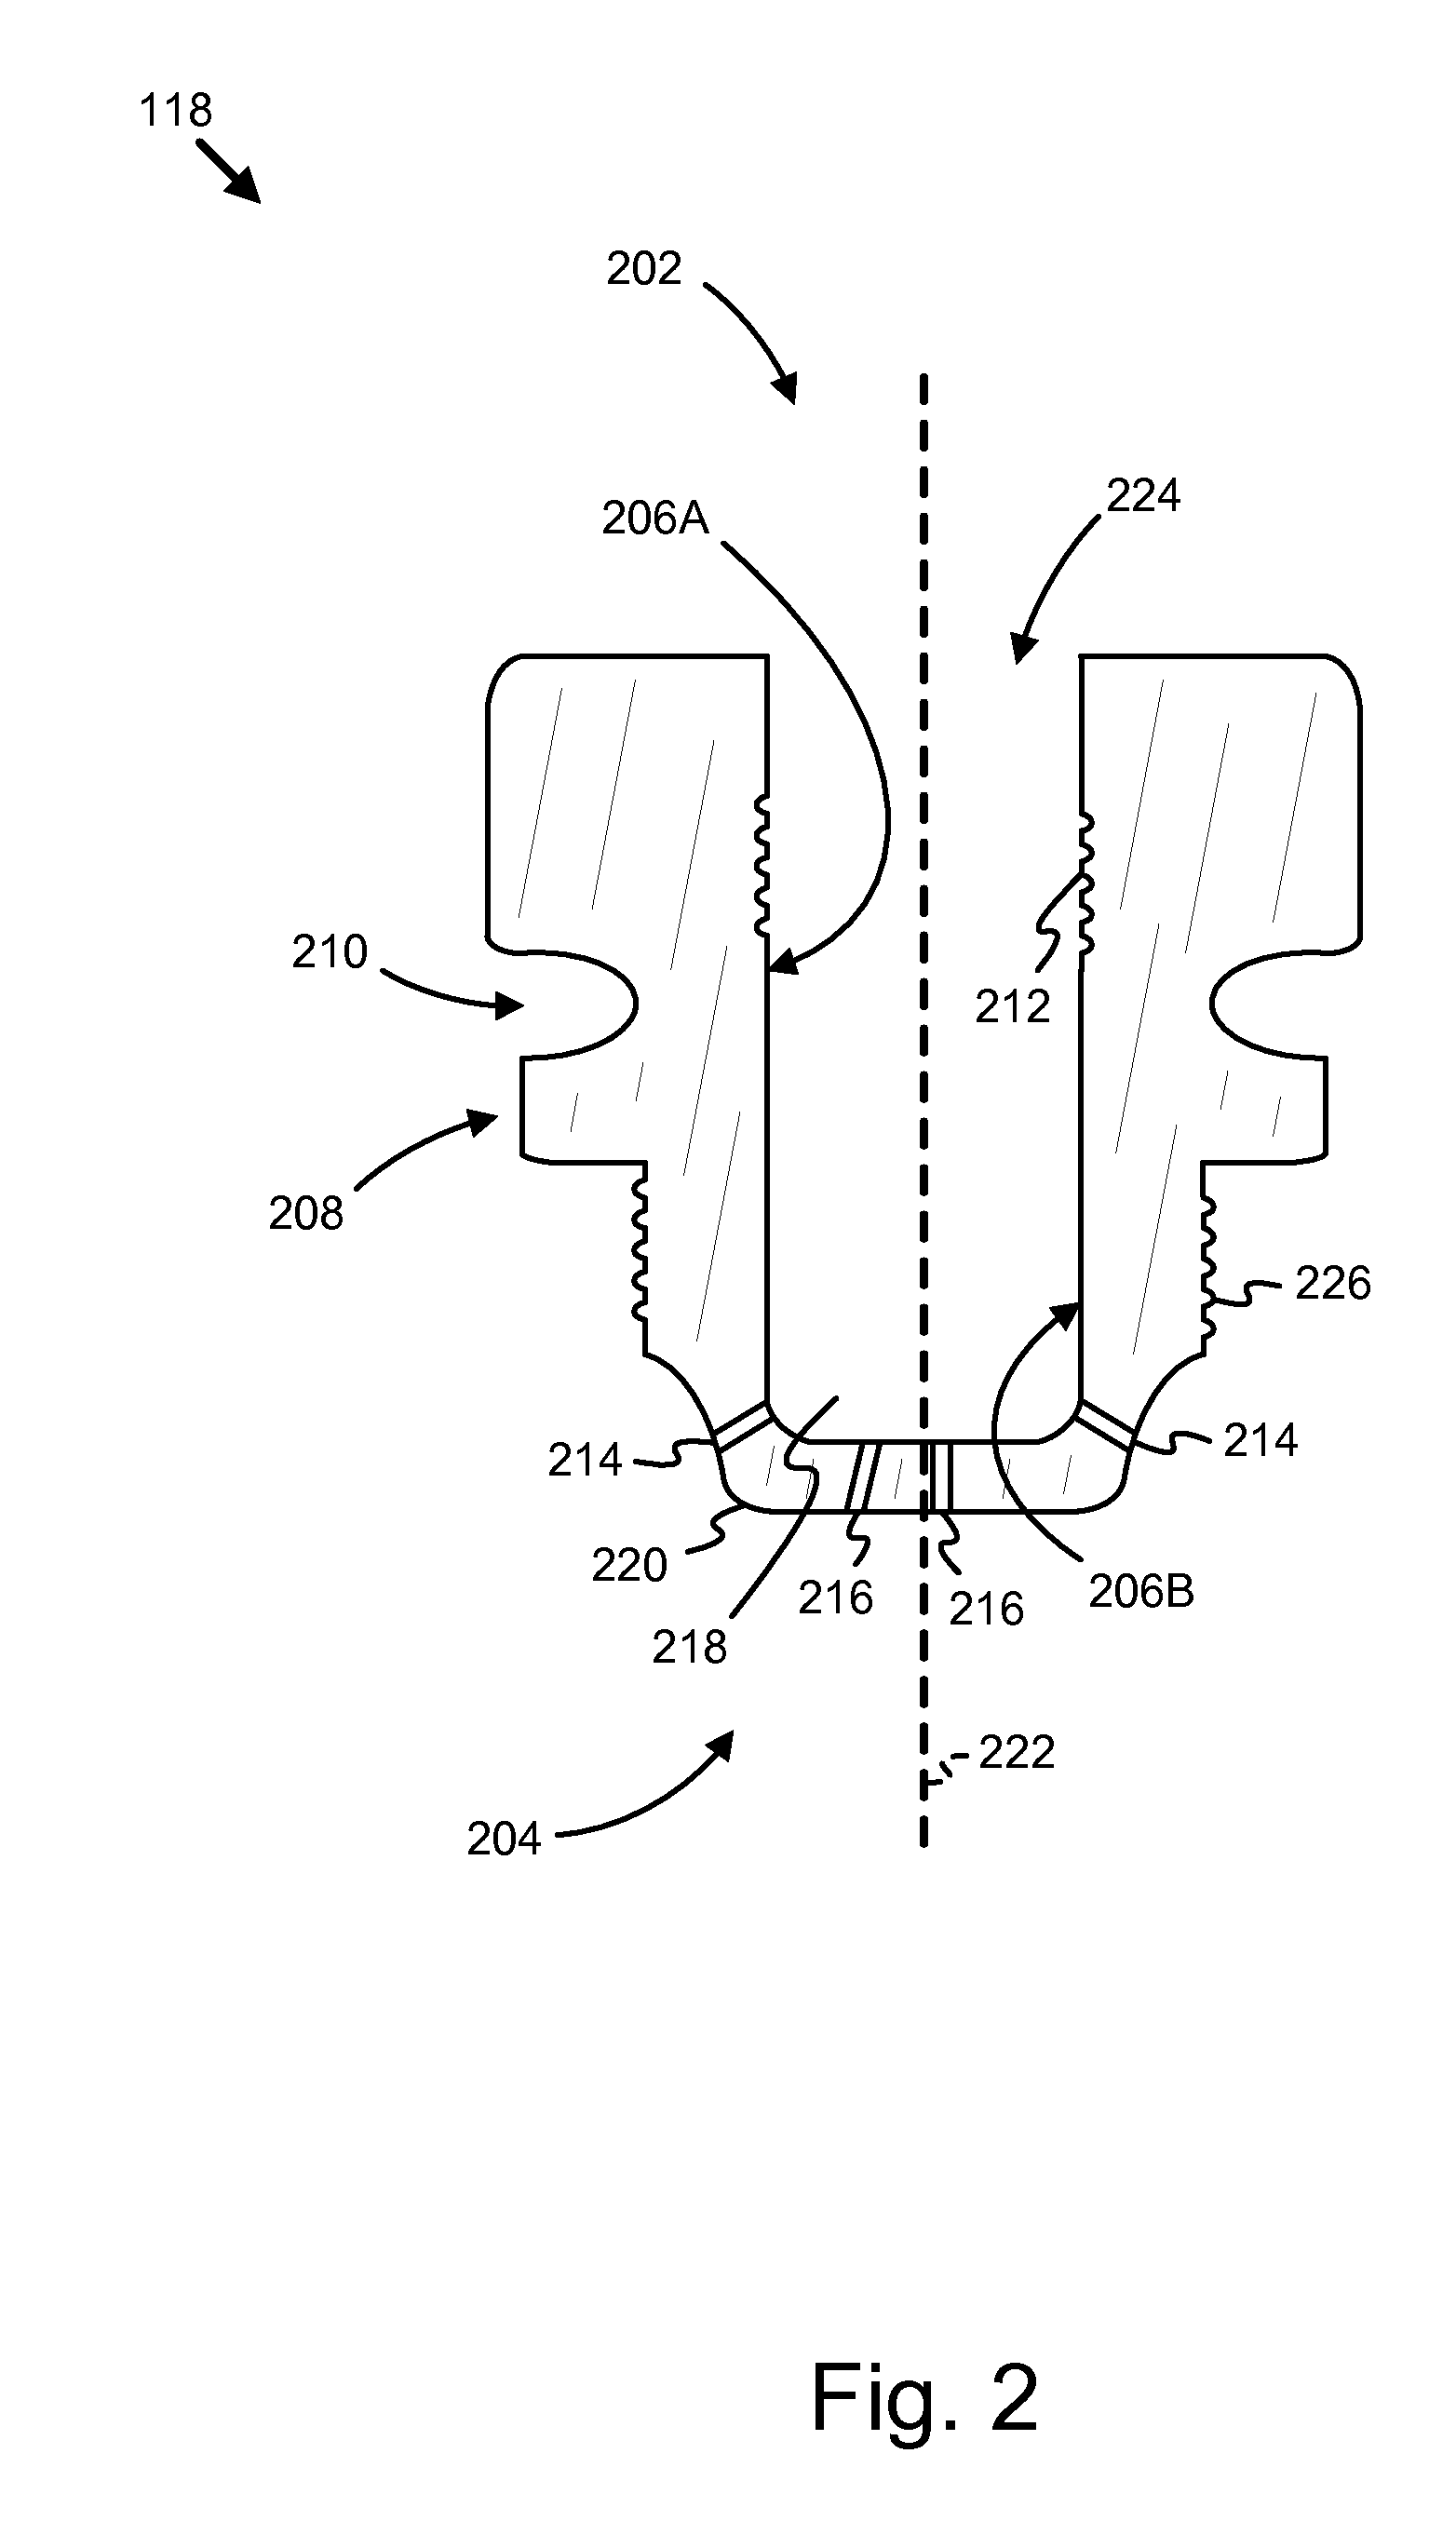 Pre-combustion device for an internal combustion engine